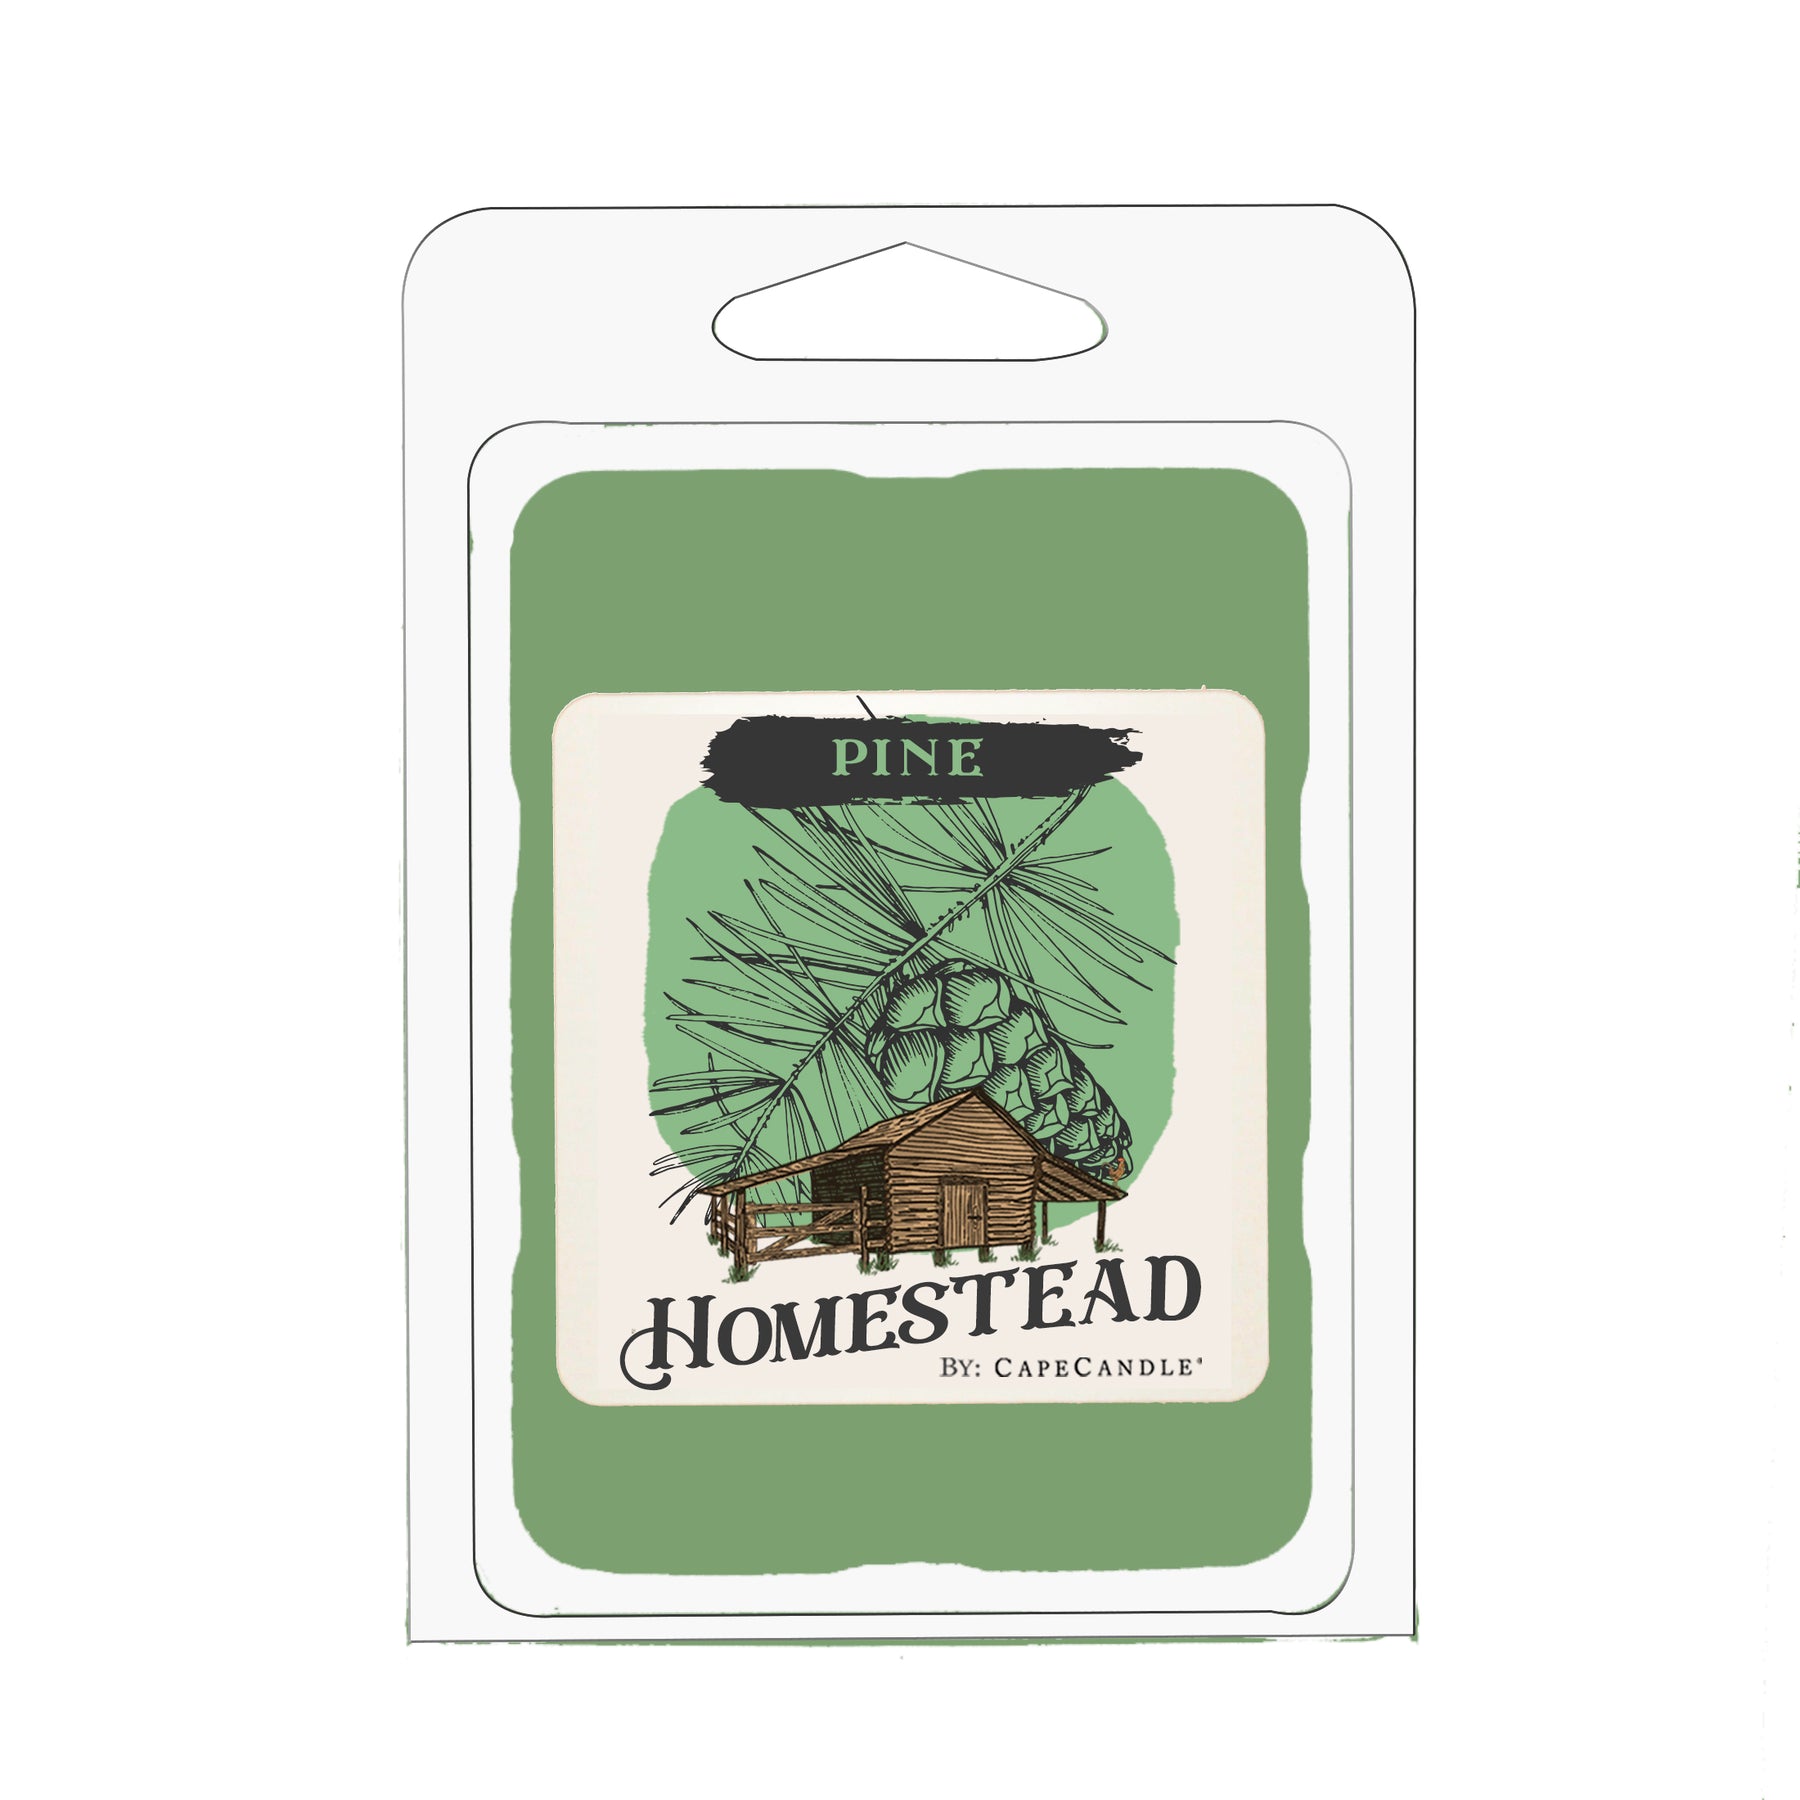 Pine 3.5oz Homestead Soy Wax Melts by Cape Candle